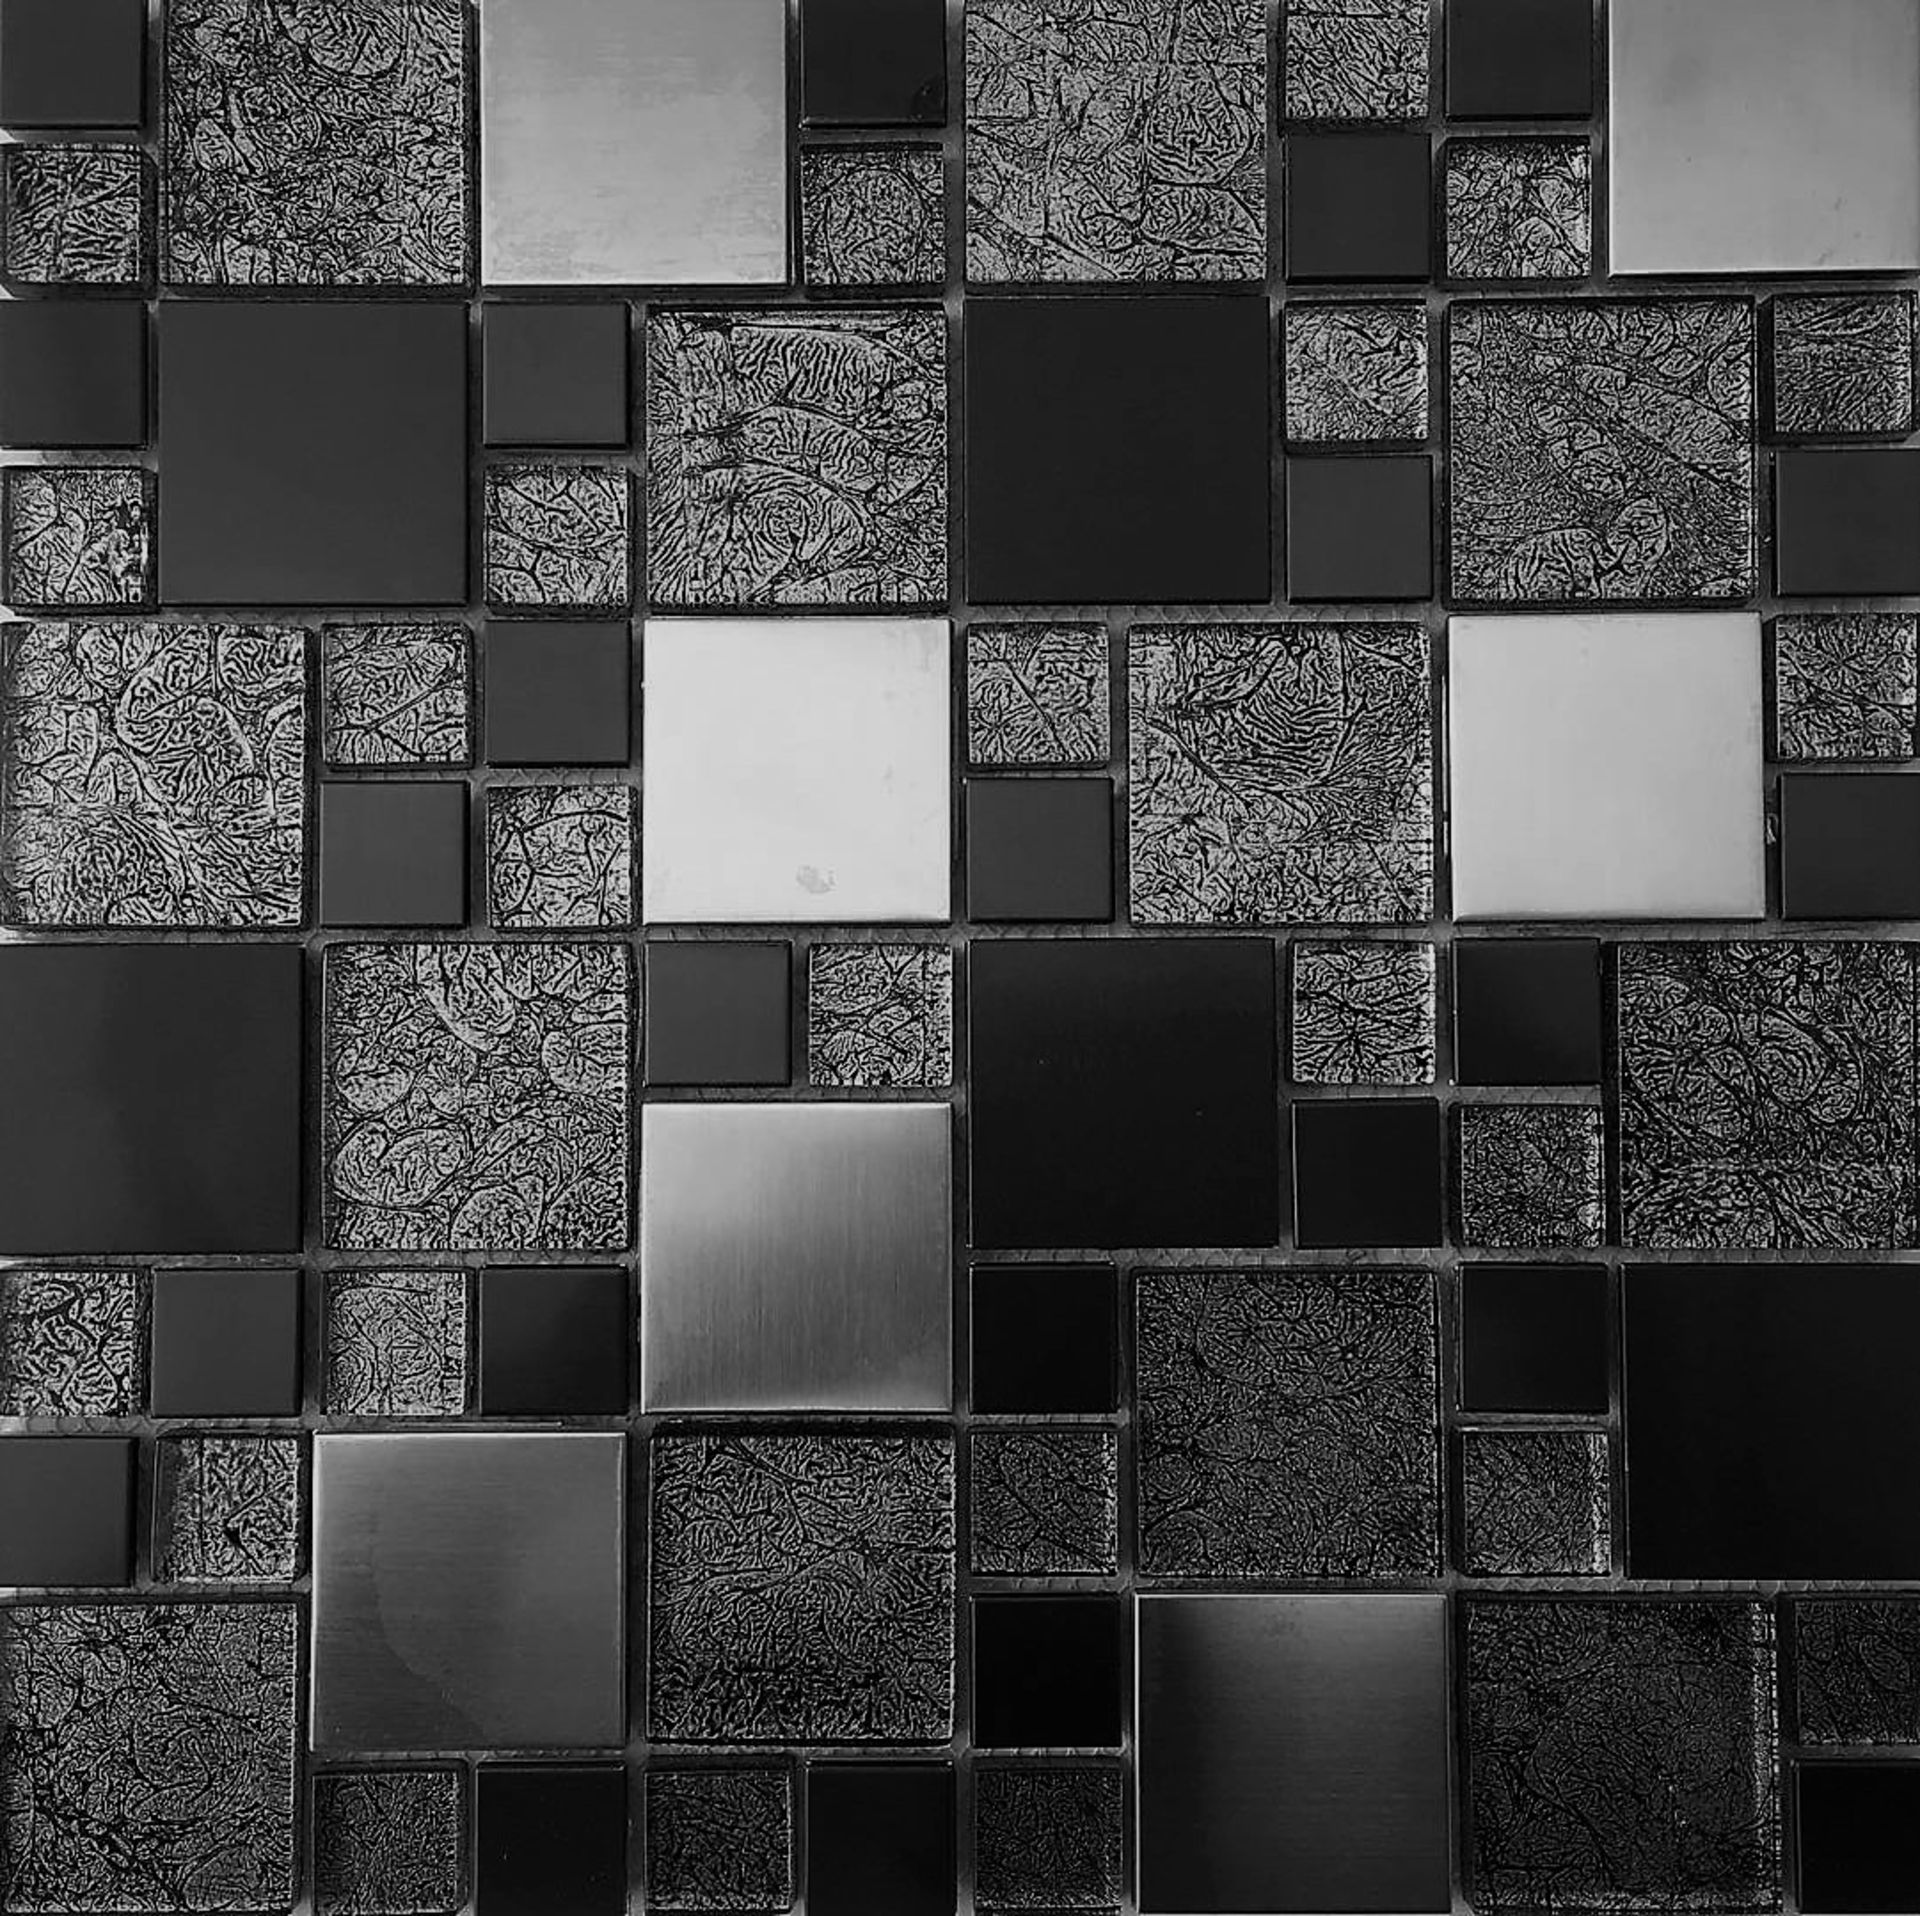 5 Square Metres - High Quality Glass/Stainless Steel Mosaic Tiles - Image 4 of 5